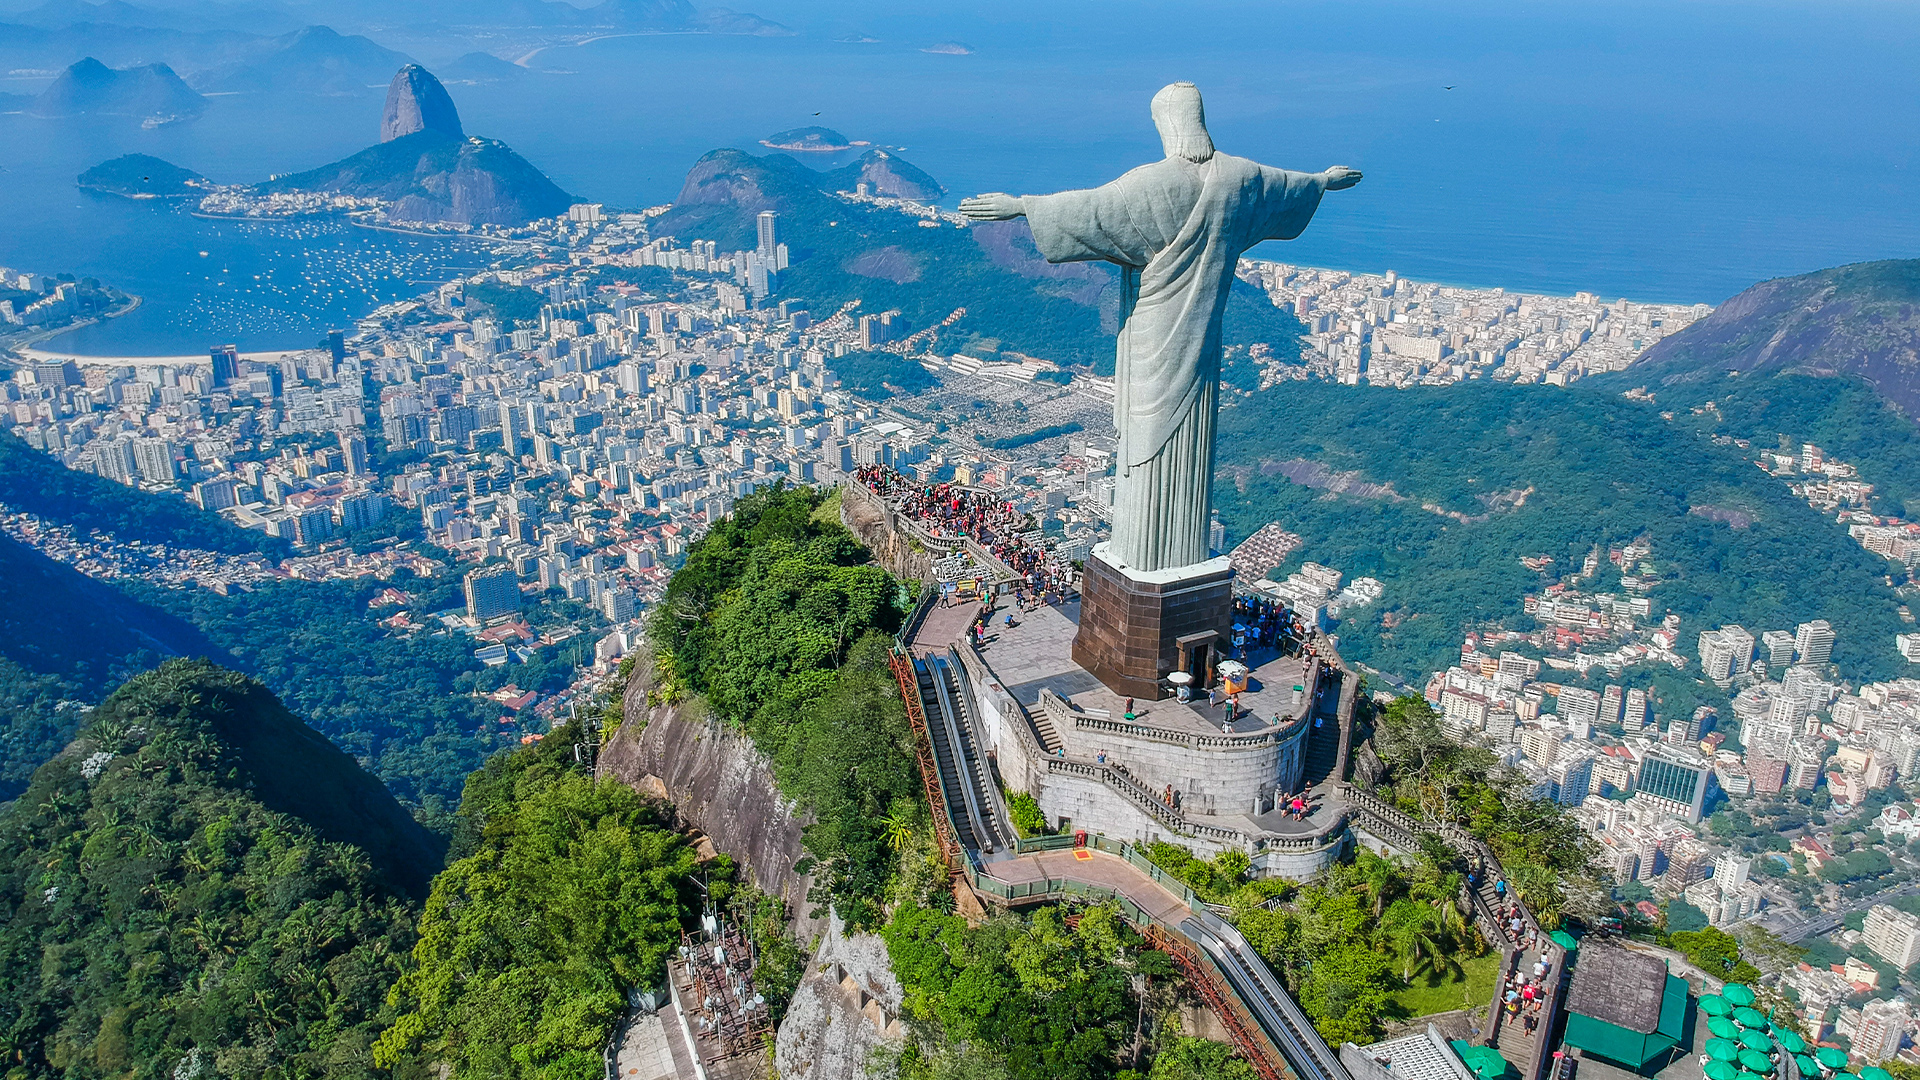 Destinations: Aerial view of Christ the Redeemer statue and Corcovado Mountain, overlooking Rio de Janeiro, Brazil, South America